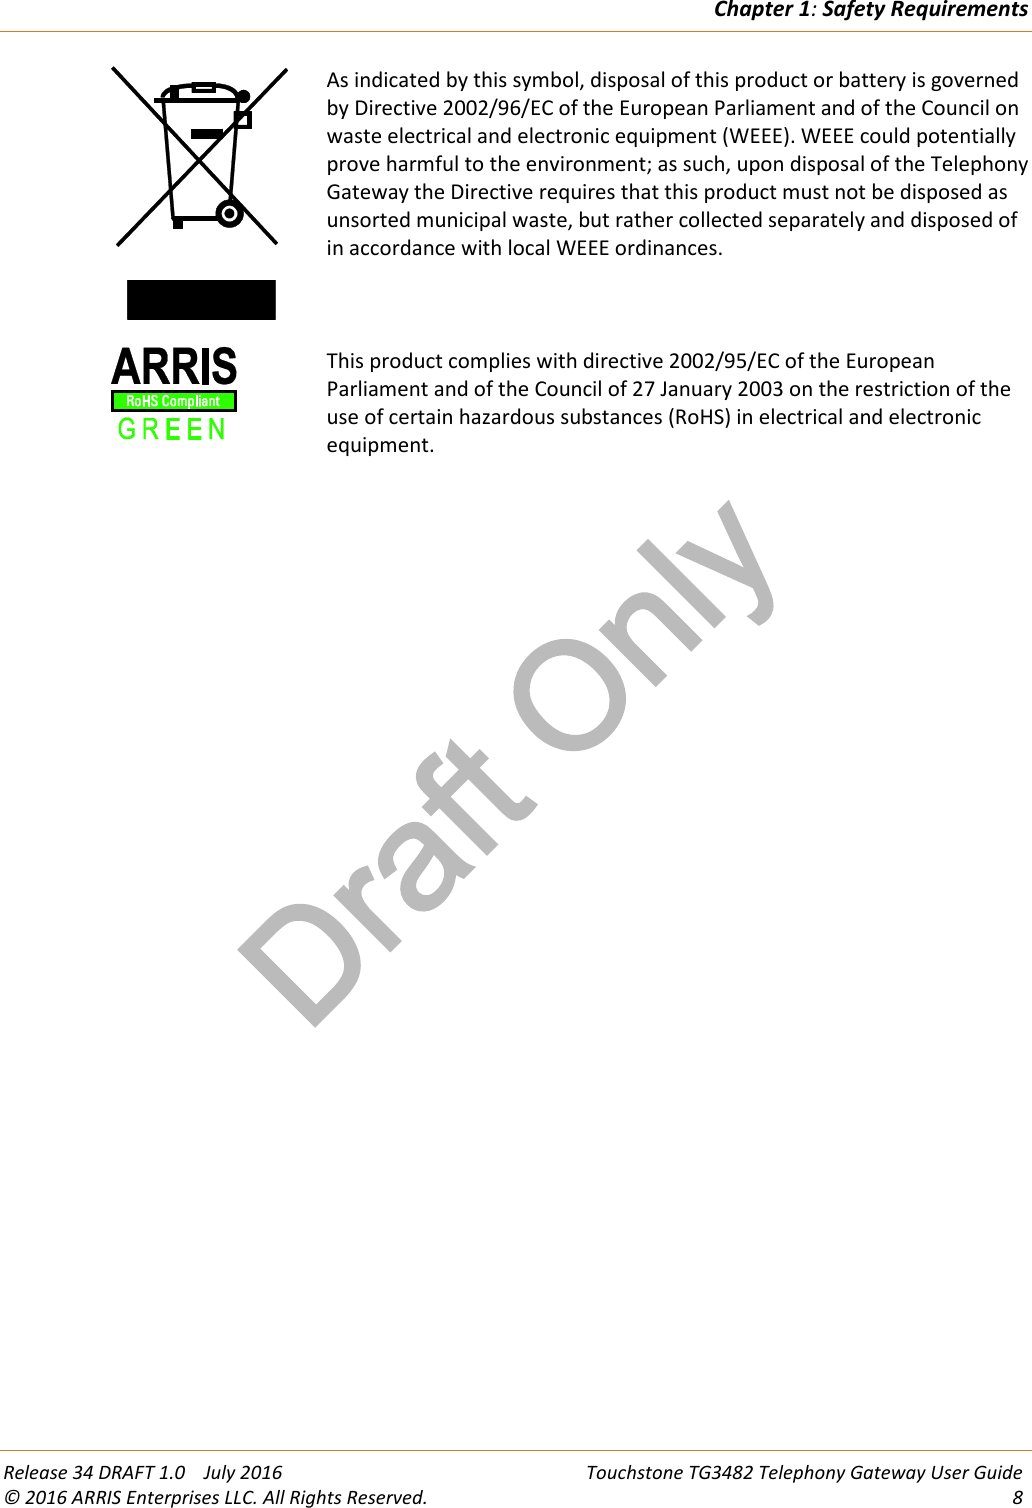 Draft OnlyChapter 1:Safety RequirementsRelease 34 DRAFT 1.0 July 2016 Touchstone TG3482 Telephony Gateway User Guide© 2016 ARRIS Enterprises LLC. All Rights Reserved. 8As indicated by this symbol, disposal of this product or battery is governedby Directive 2002/96/EC of the European Parliament and of the Council onwaste electrical and electronic equipment (WEEE). WEEE could potentiallyprove harmful to the environment; as such, upon disposal of the TelephonyGateway the Directive requires that this product must not be disposed asunsorted municipal waste, but rather collected separately and disposed ofin accordance with local WEEE ordinances.This product complies with directive 2002/95/EC of the EuropeanParliament and of the Council of 27 January 2003 on the restriction of theuse of certain hazardous substances (RoHS) in electrical and electronicequipment.